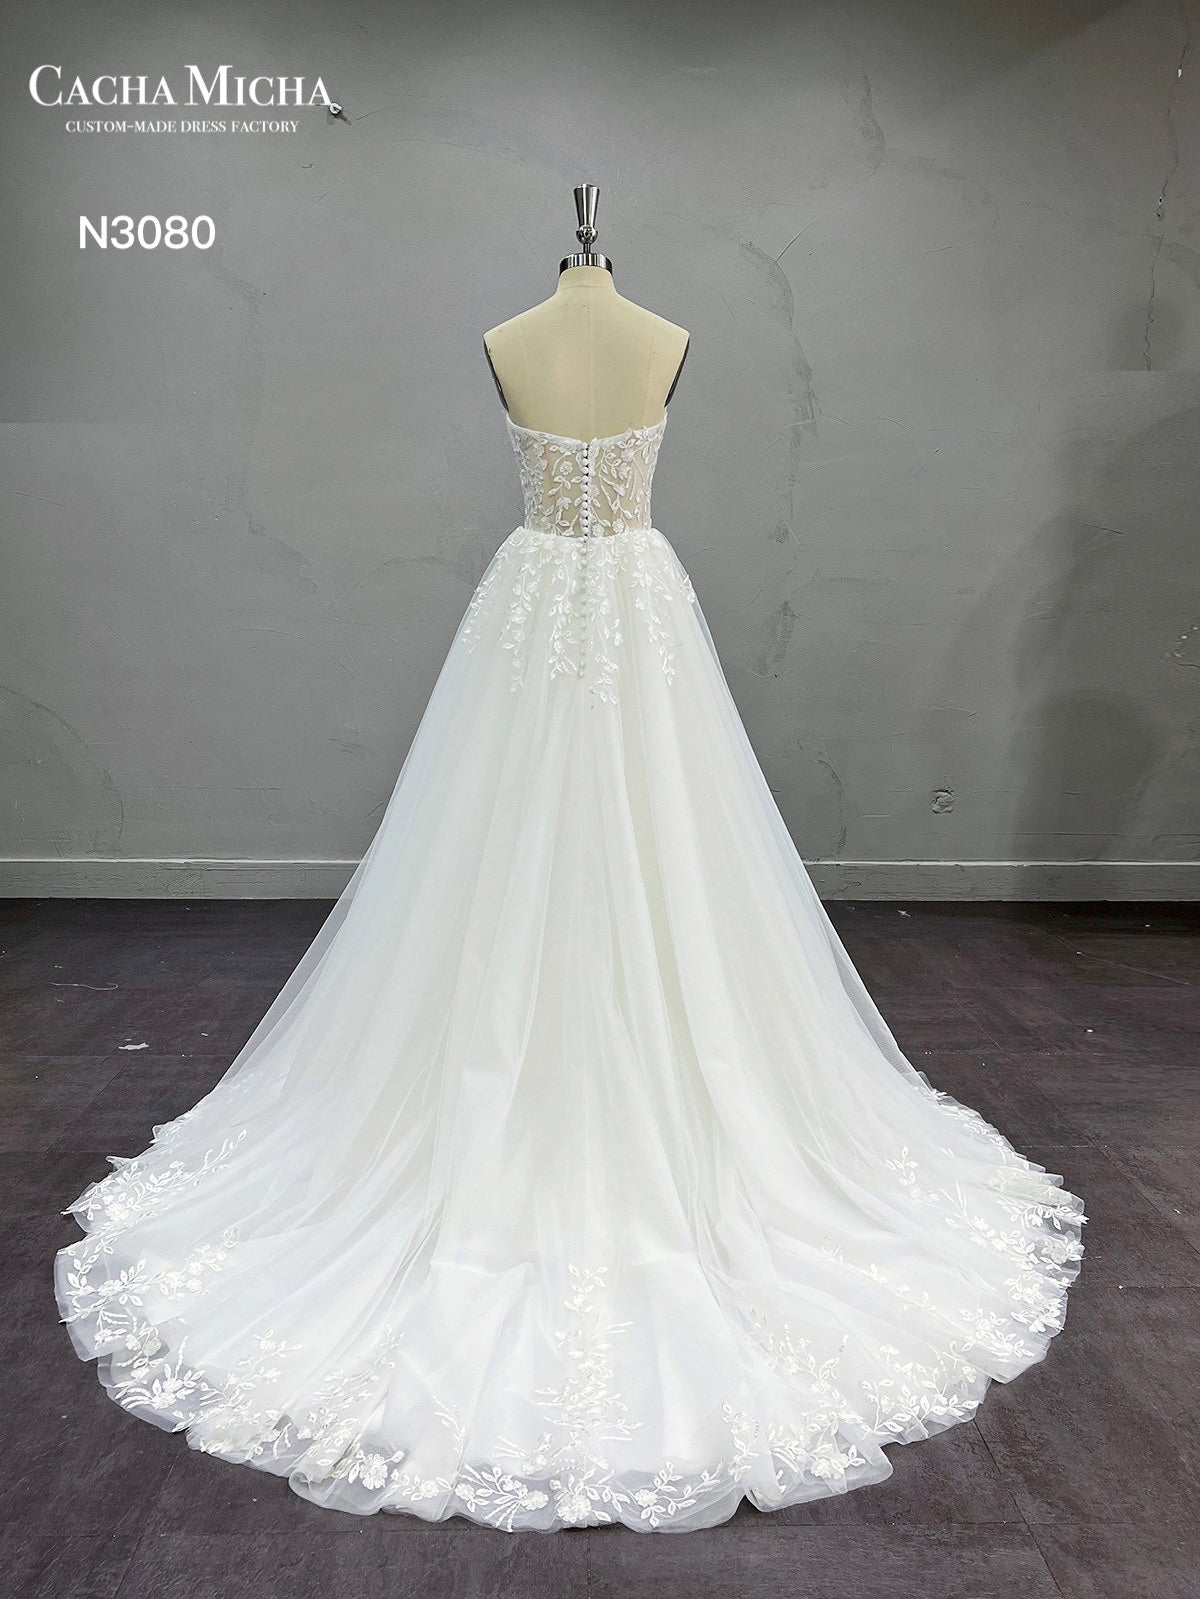 Lace Mermaid Wedding Dress With Ball Gown Over Skirt N3080